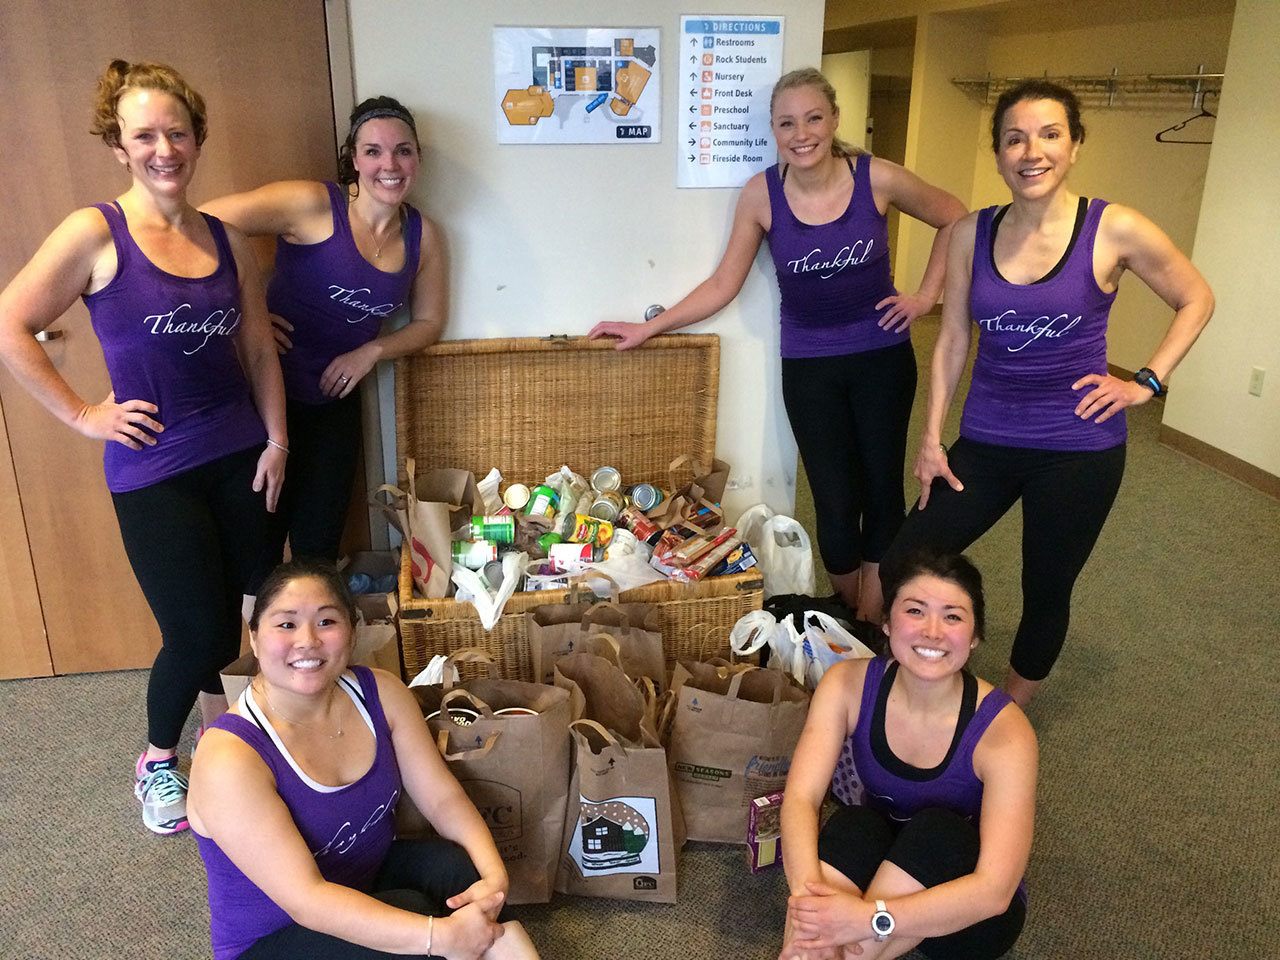 Nearly 80 people last week for a Thanksgiving jazzercise class at Mercer Island Presbyterian Church. They collected donations to stock the Mercer Island Youth and Family Services Food Bank. Contributed photo